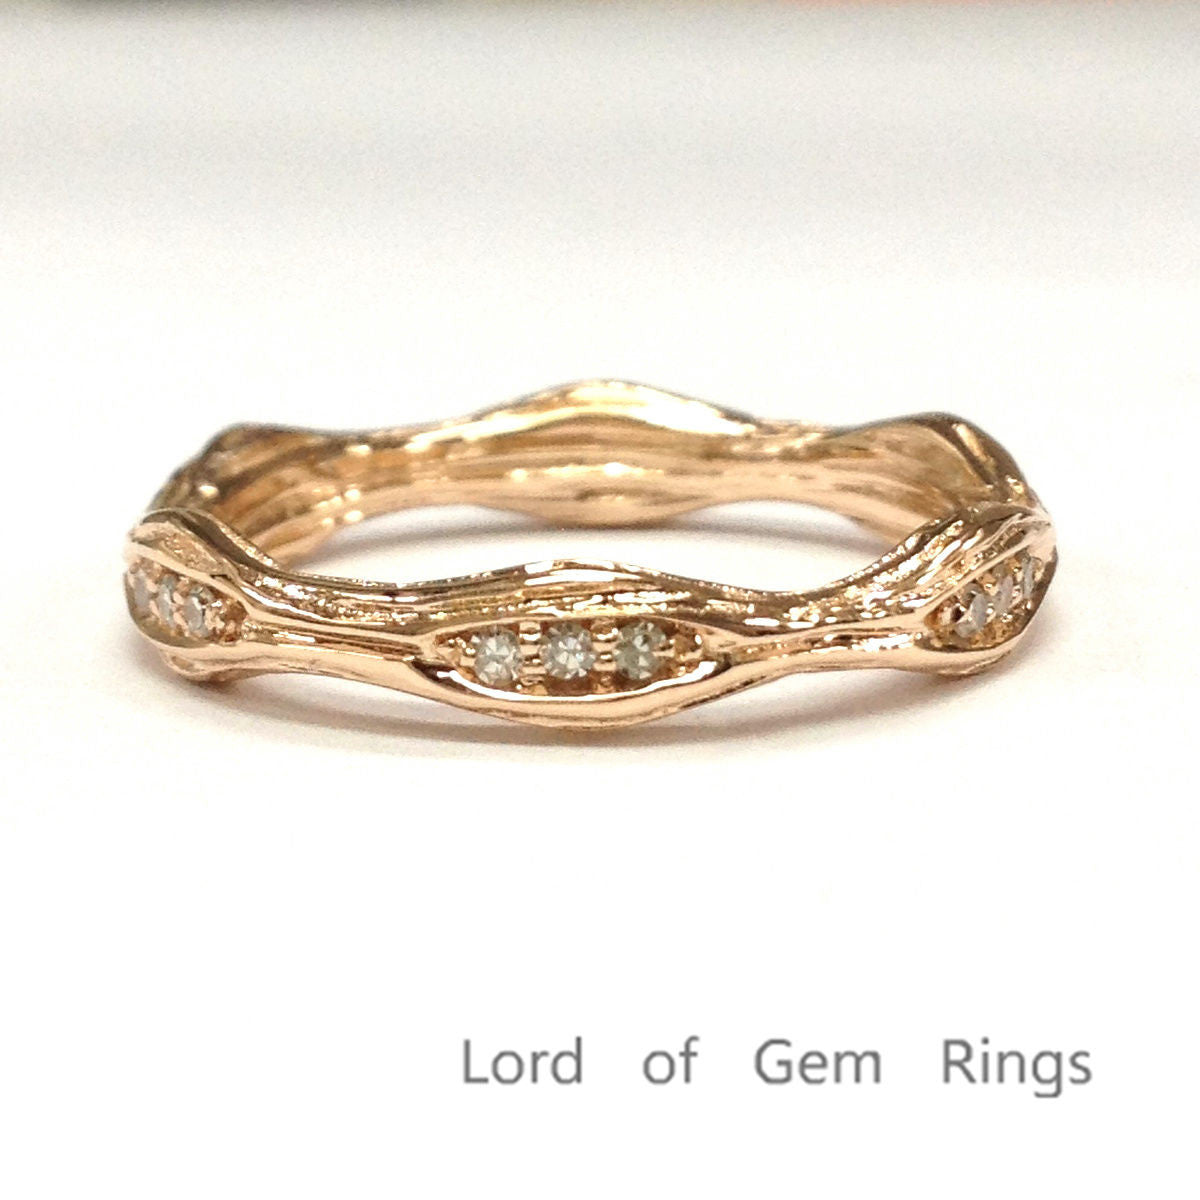 Pave Diamond Wedding Band Eternity Anniversary Ring 14K Rose Gold Art Deco Hand Crafted Twig - Lord of Gem Rings - 3